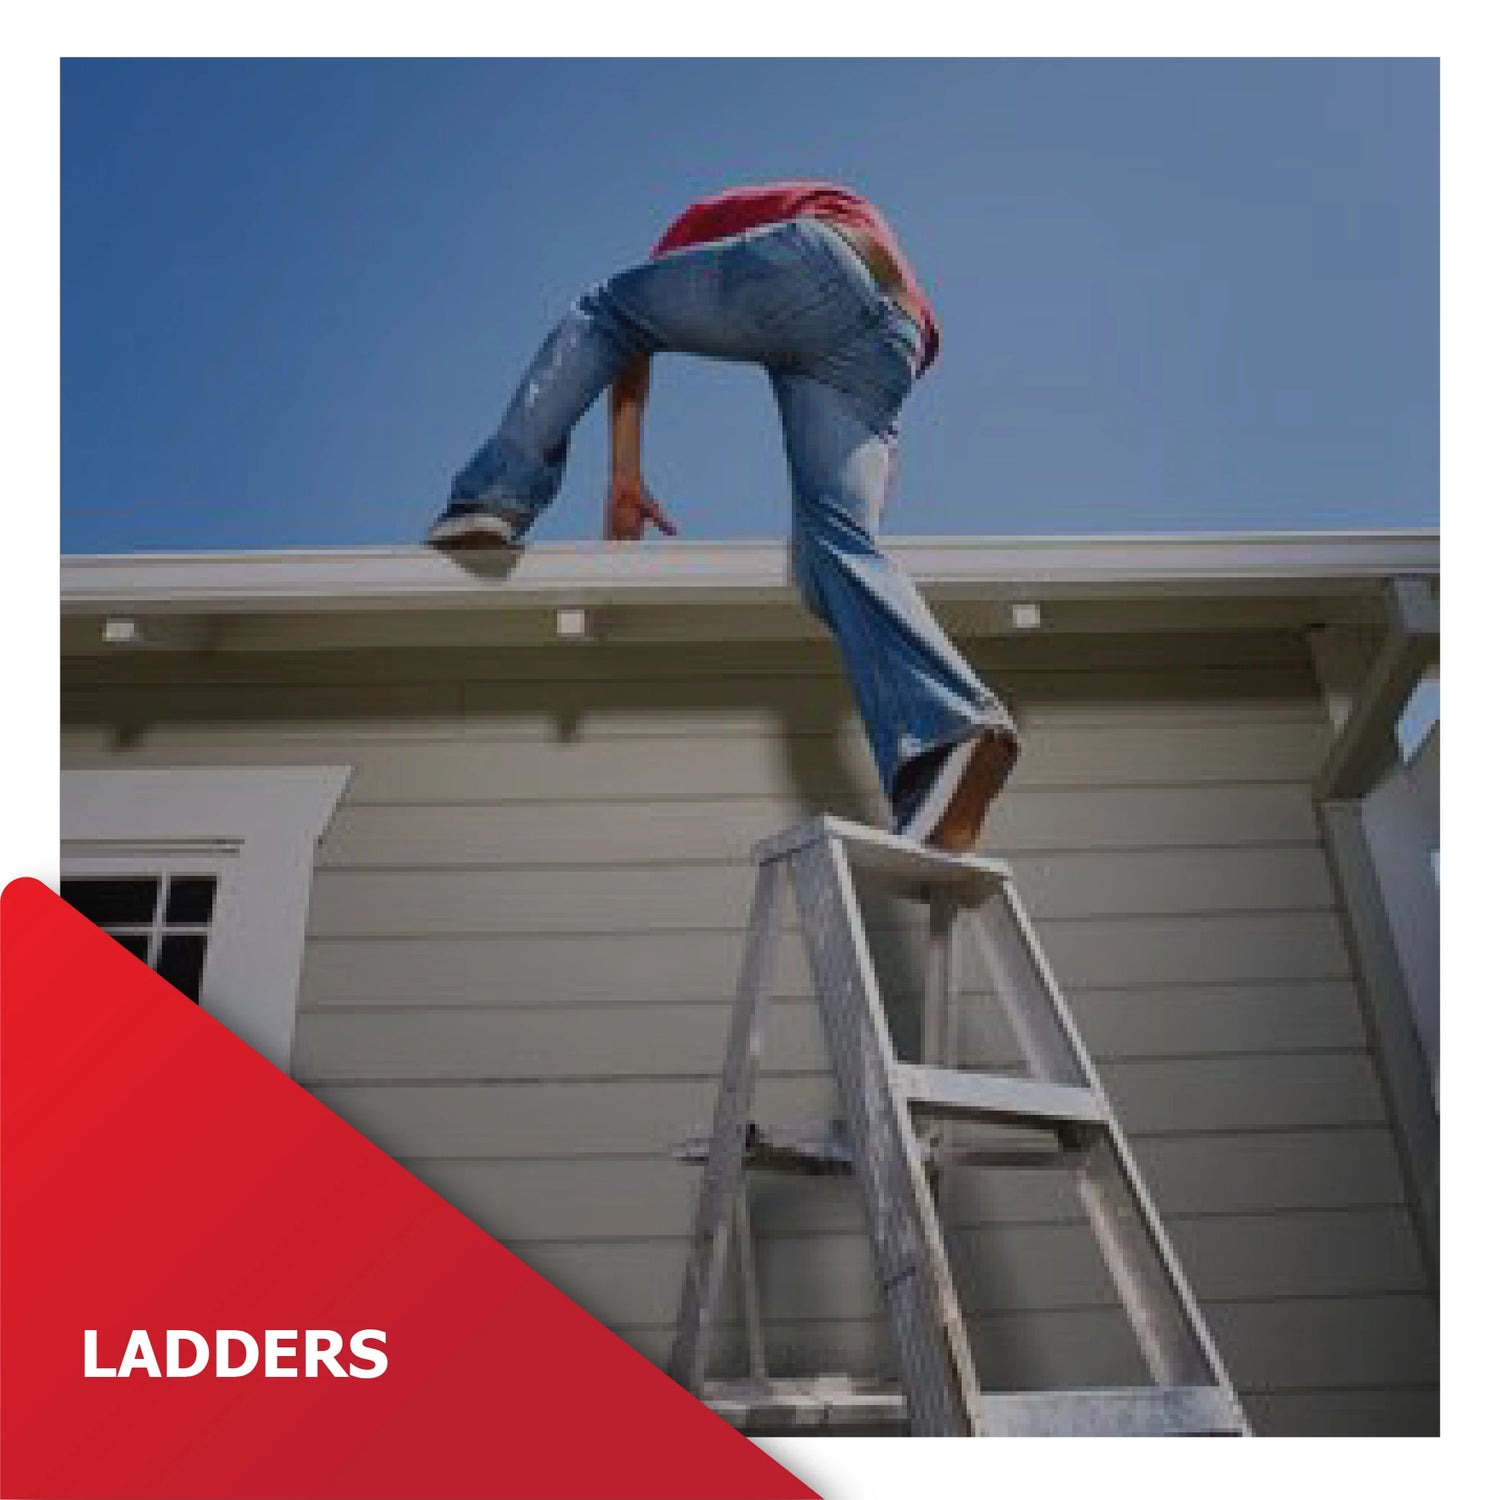 Various types of ladders - step ladders, extension ladders, and more - sold by M. M. Noorbhoy & Co.